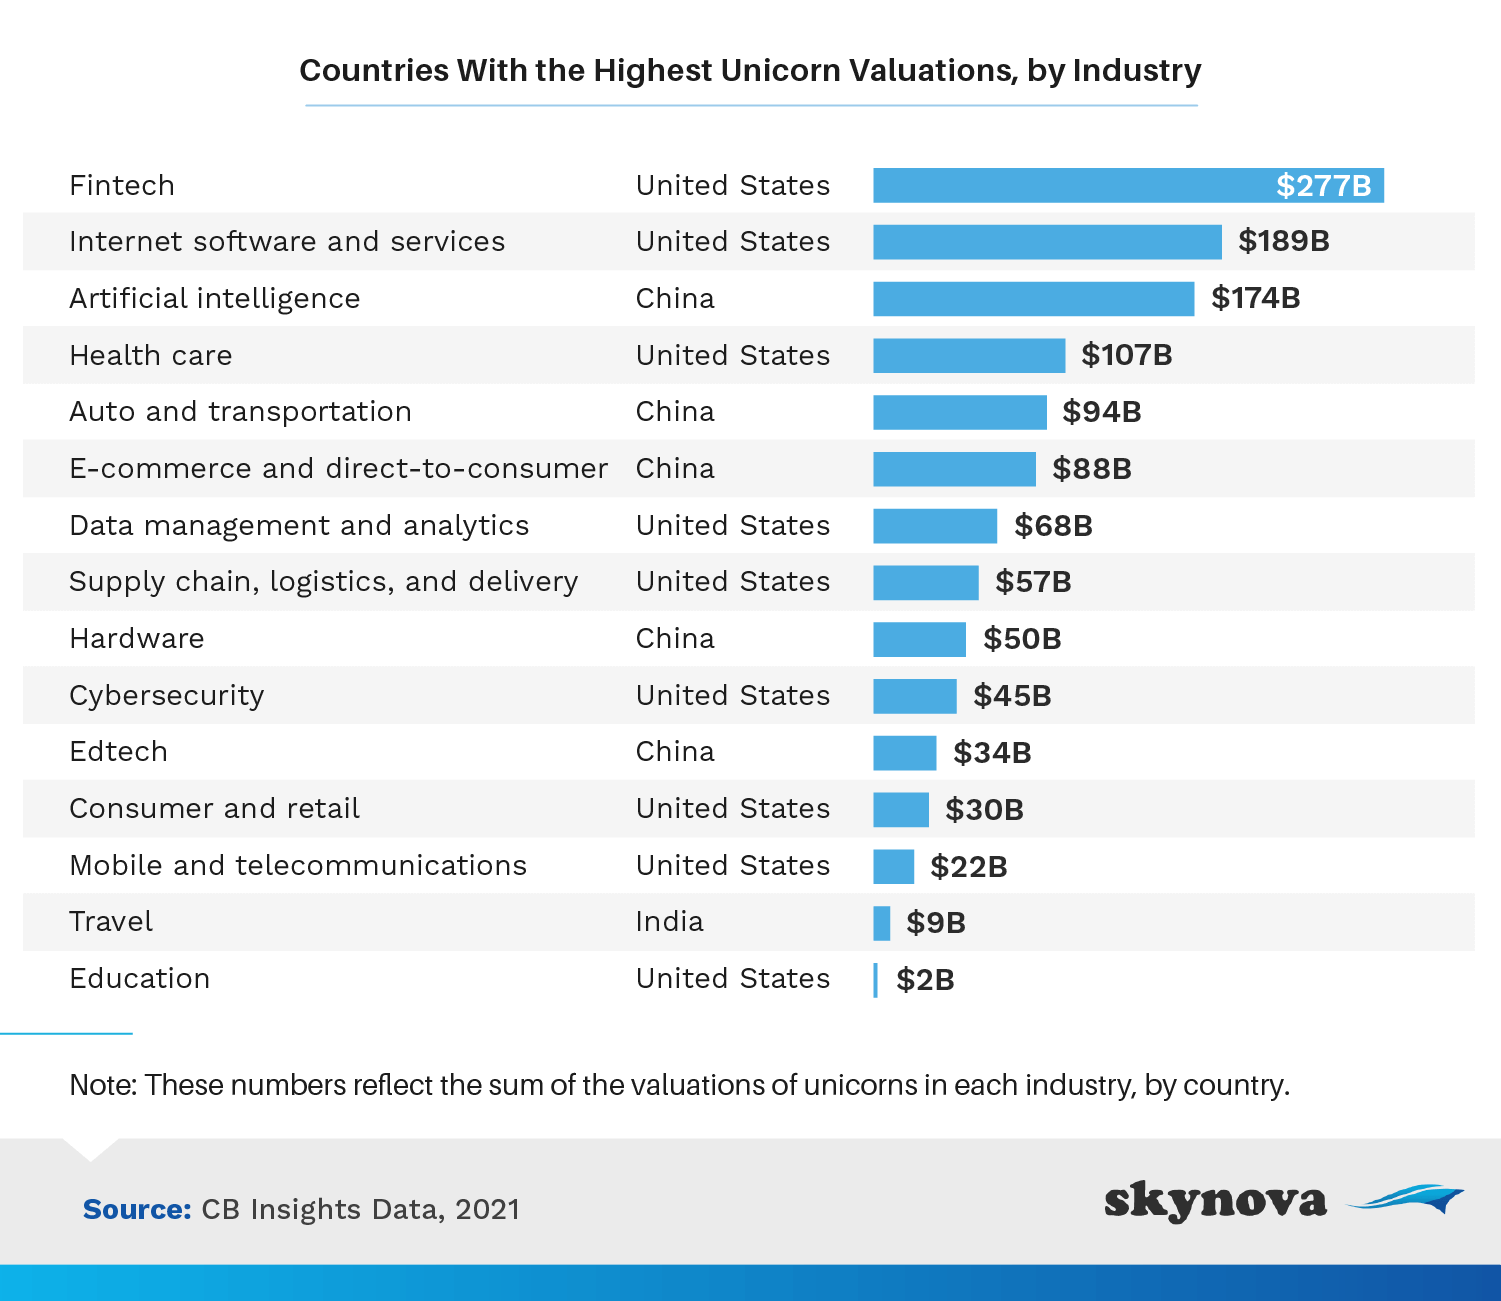 Countries with the highest unicorn valuations, by industry